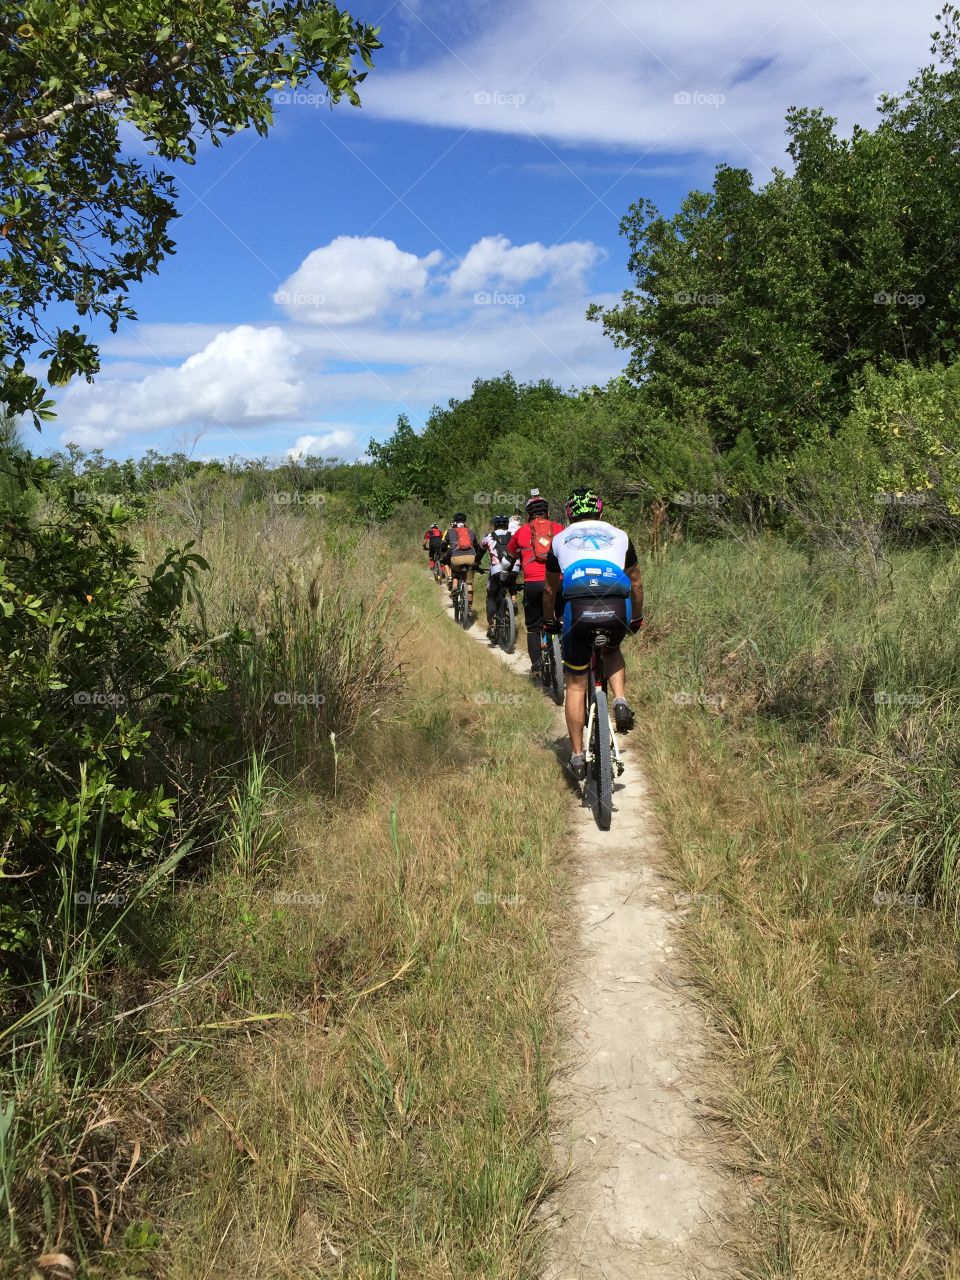 Group of people riding through forest path